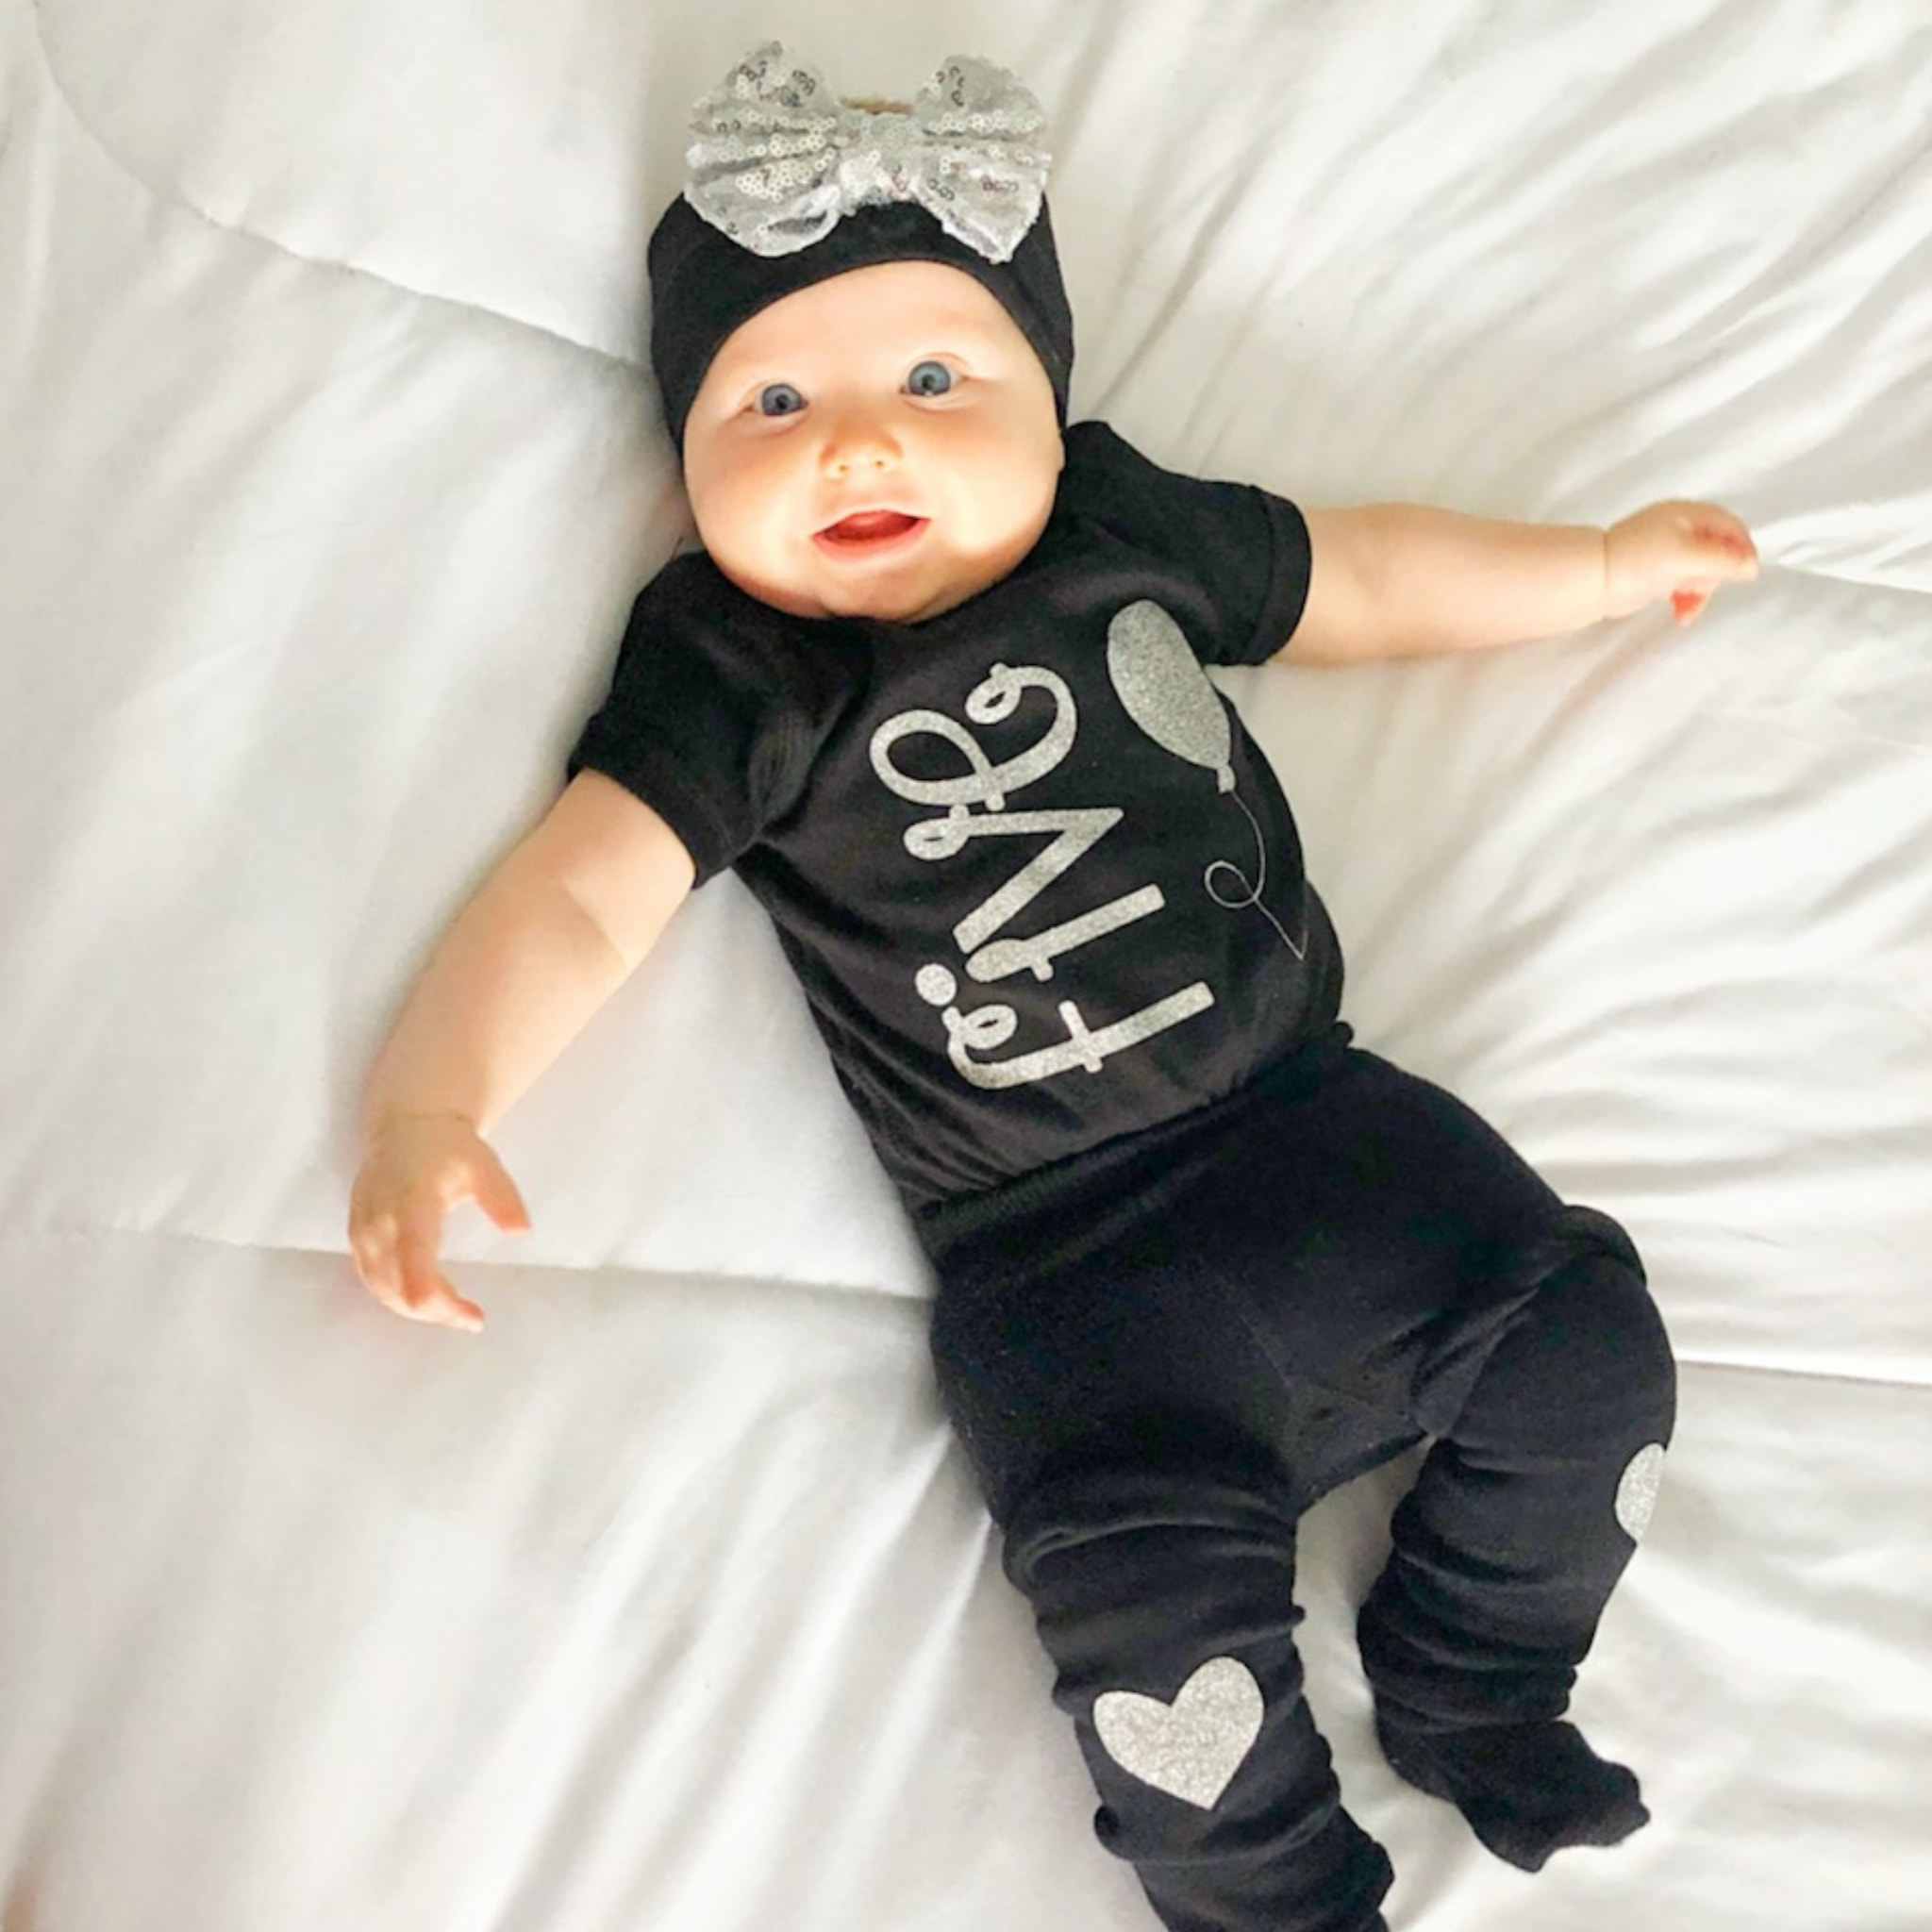 5 month old baby boy clothes